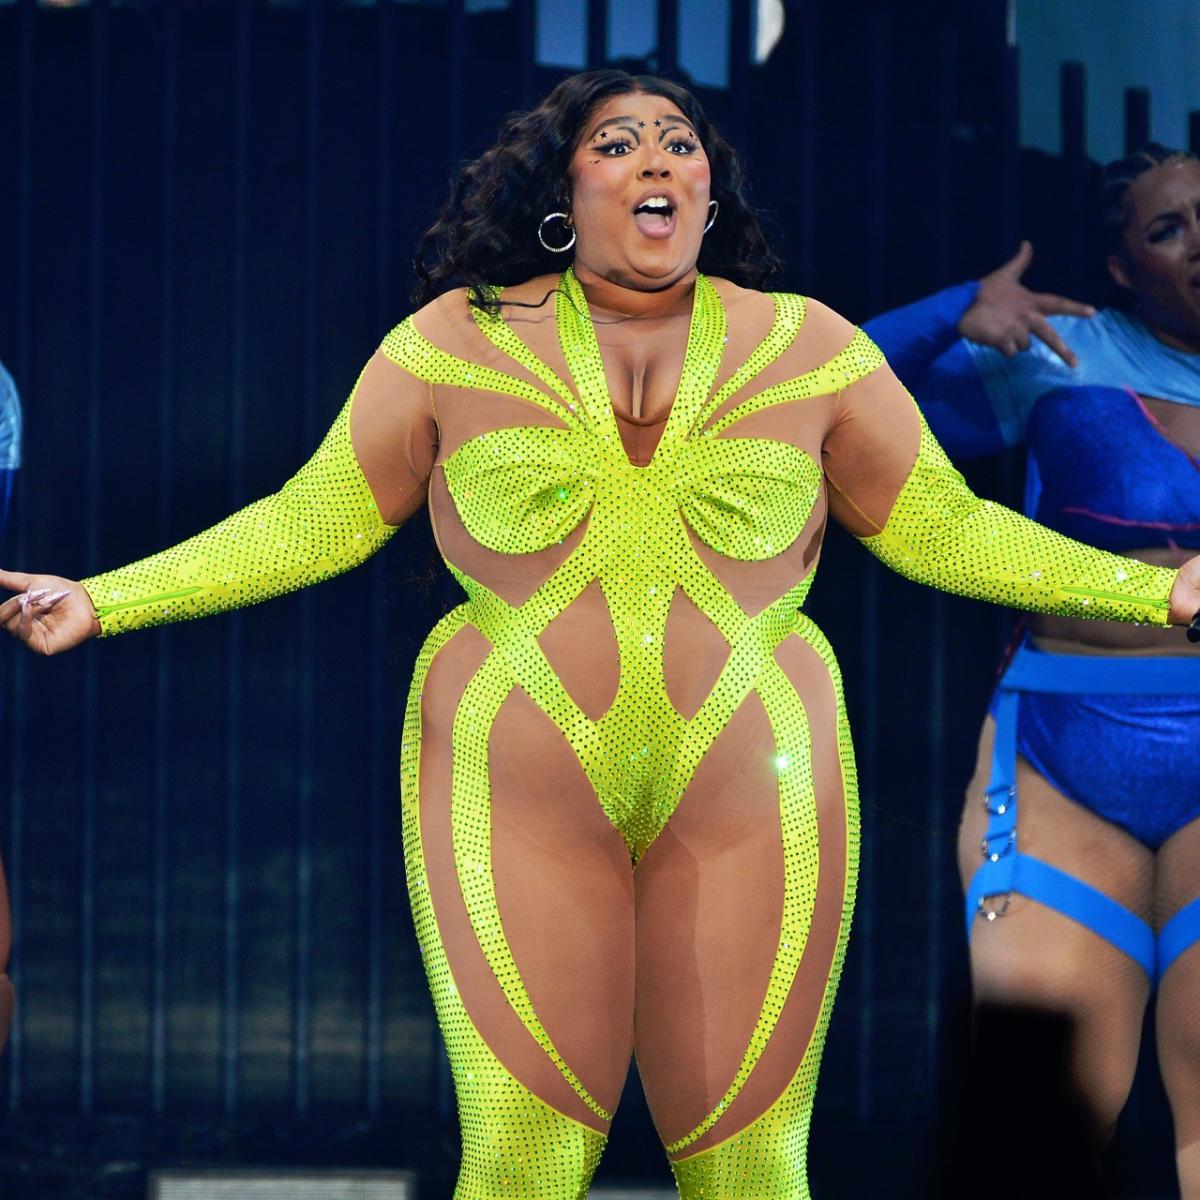 Lizzo Shows Inspiring Self-Love in New Video: “I Am the Beauty